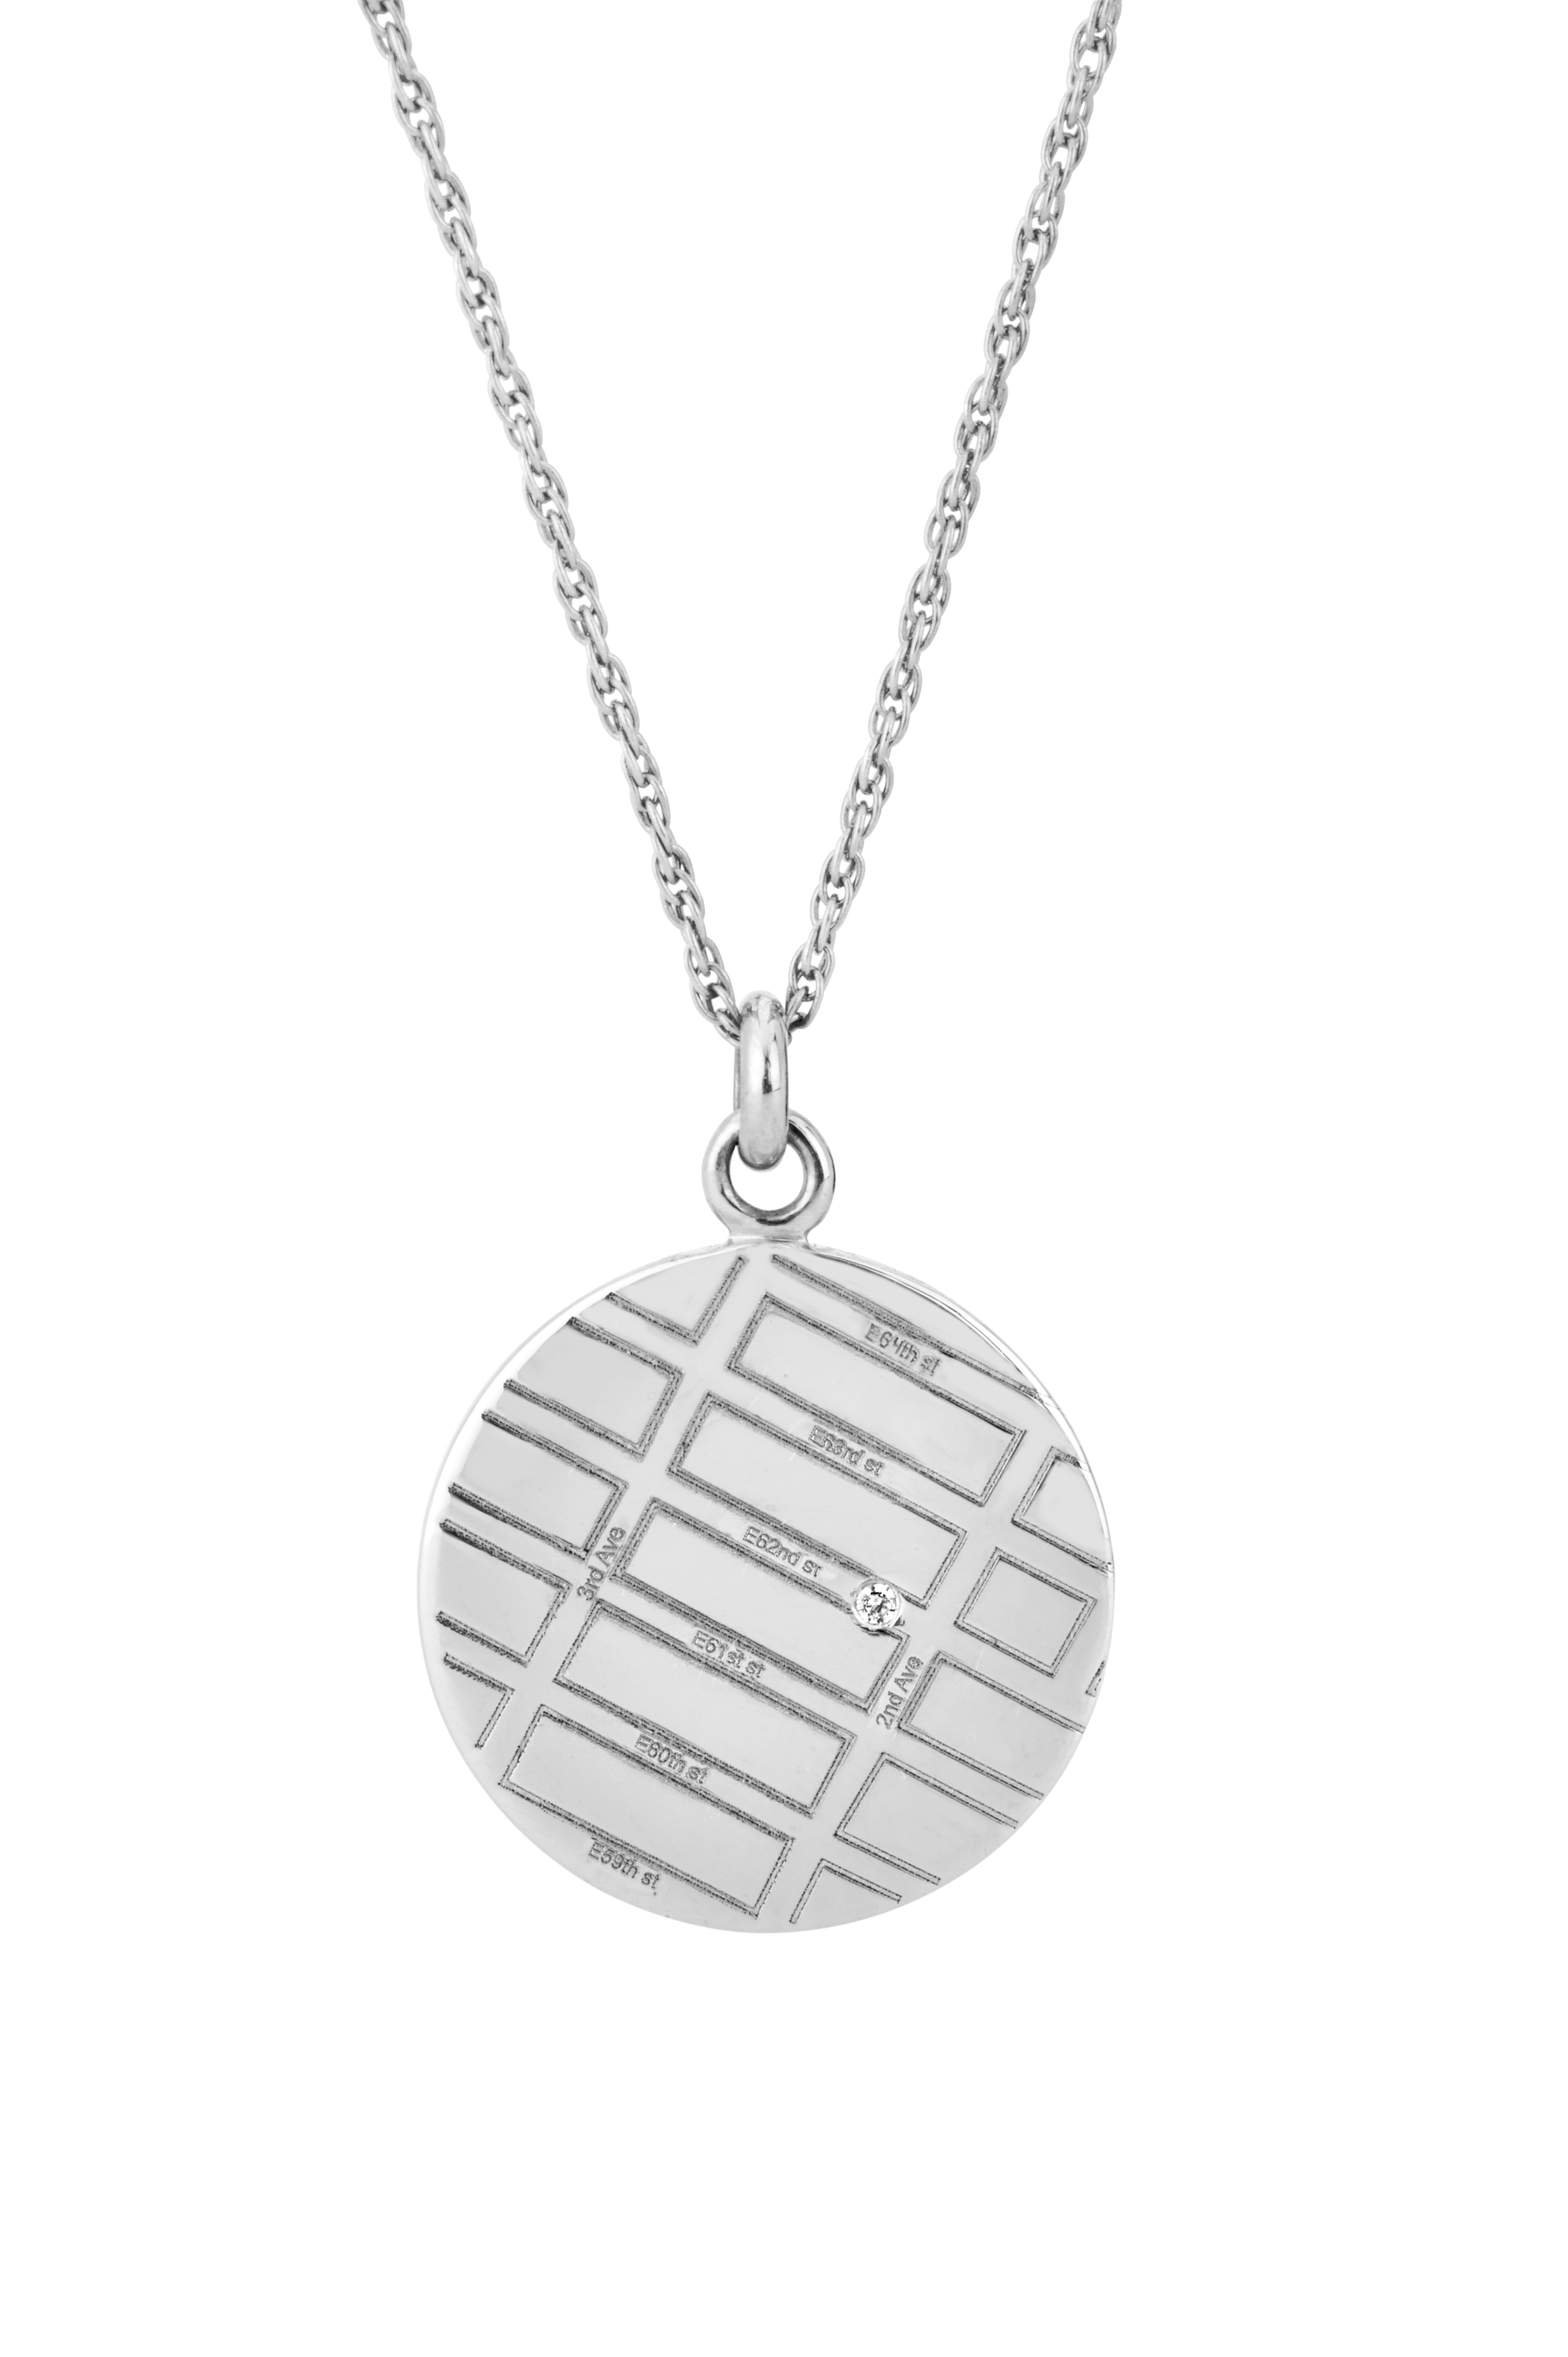 A.JAFFE  WHITE GOLD ROUND MAP PENDANT